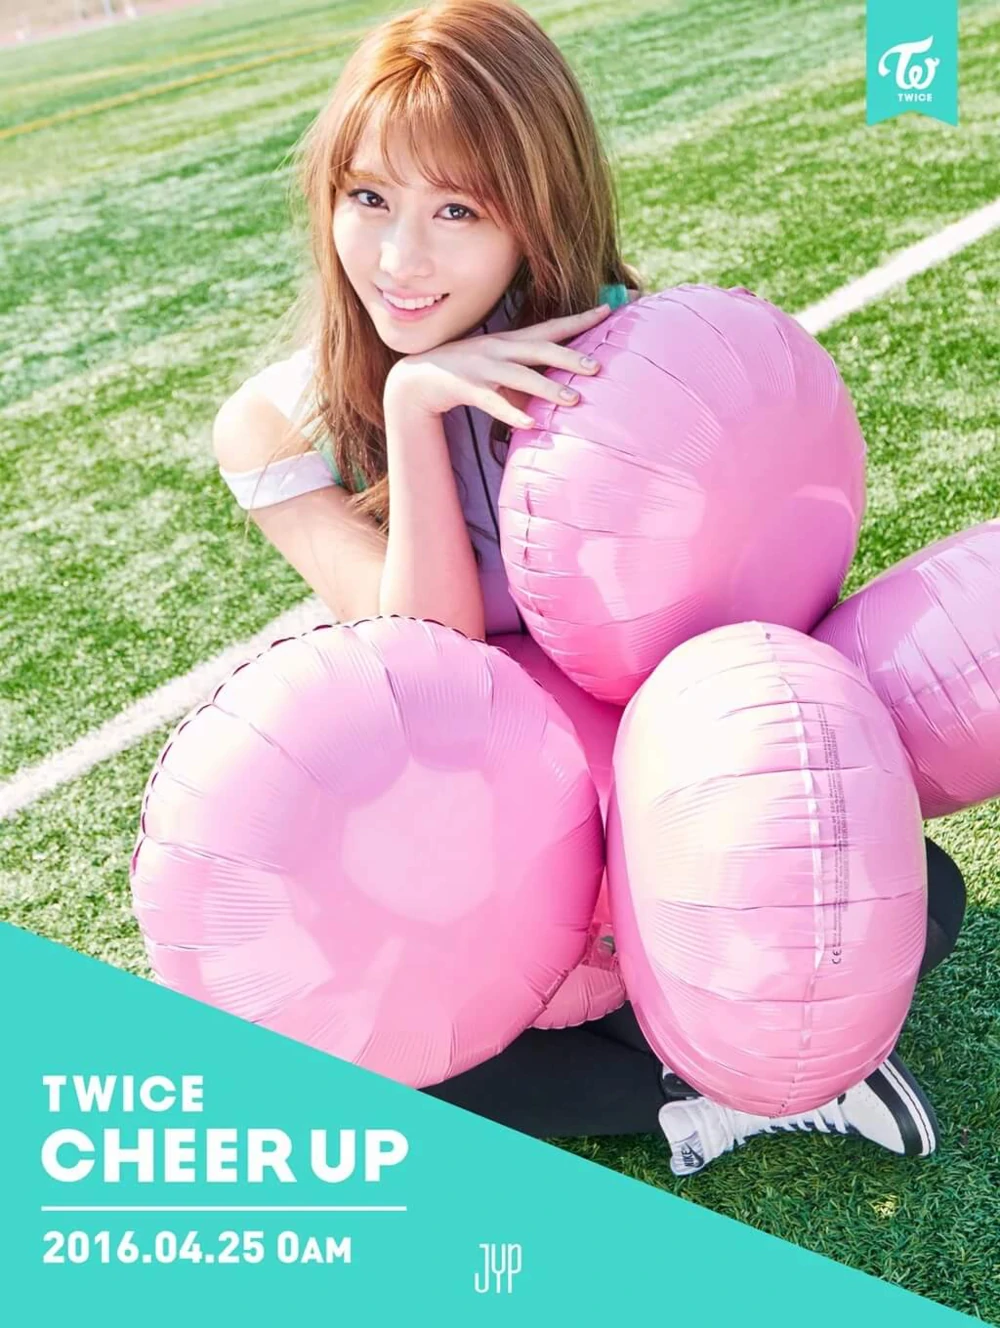 Twice Page 2 Momo Concept Teaser Picture Image Photo Kpop K-Concept 1